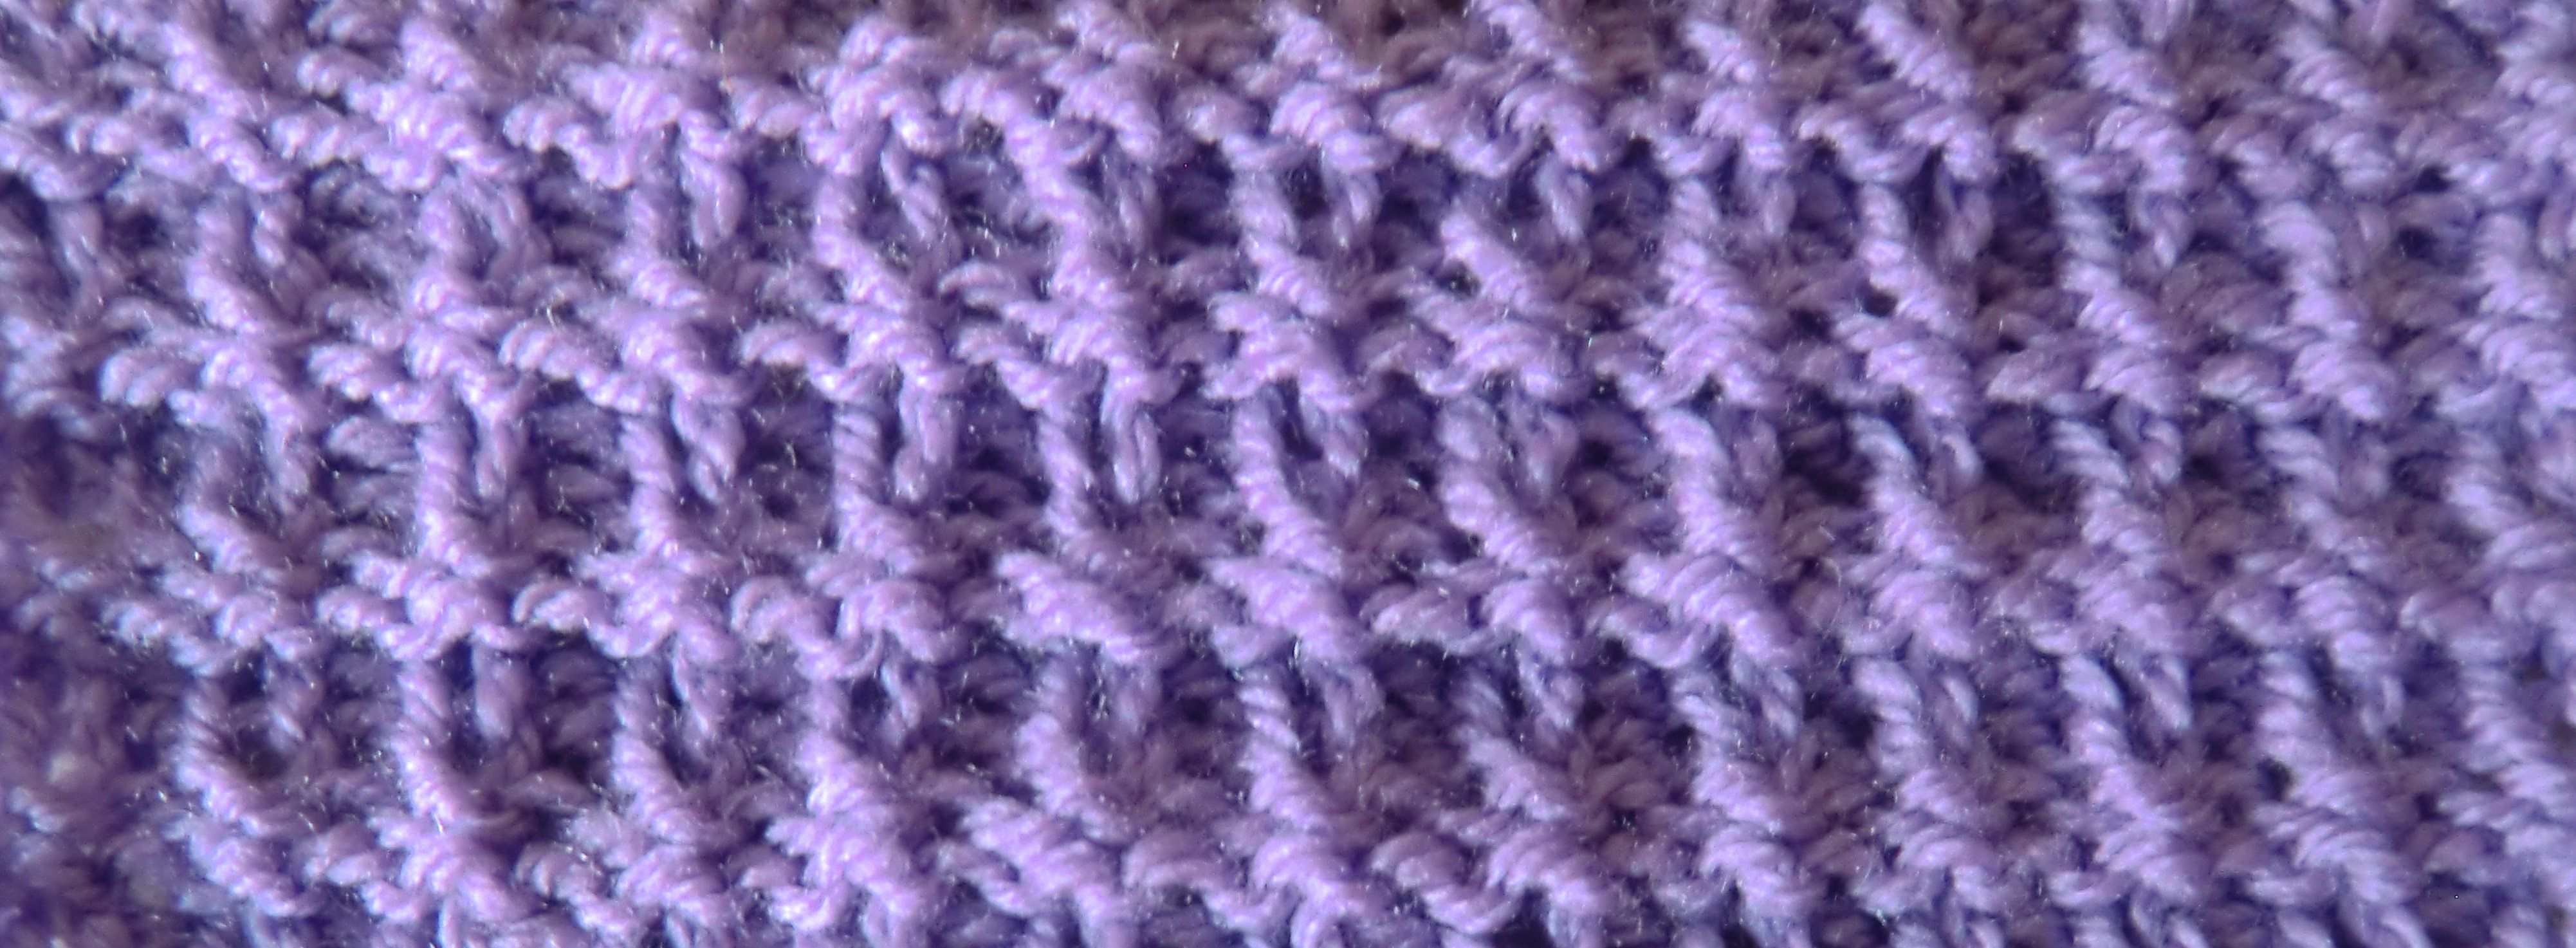 Knit Pattern Knit Purl Fantasy Stich How To Purl Knit Knit Stitch Patterns Knitting Stiches